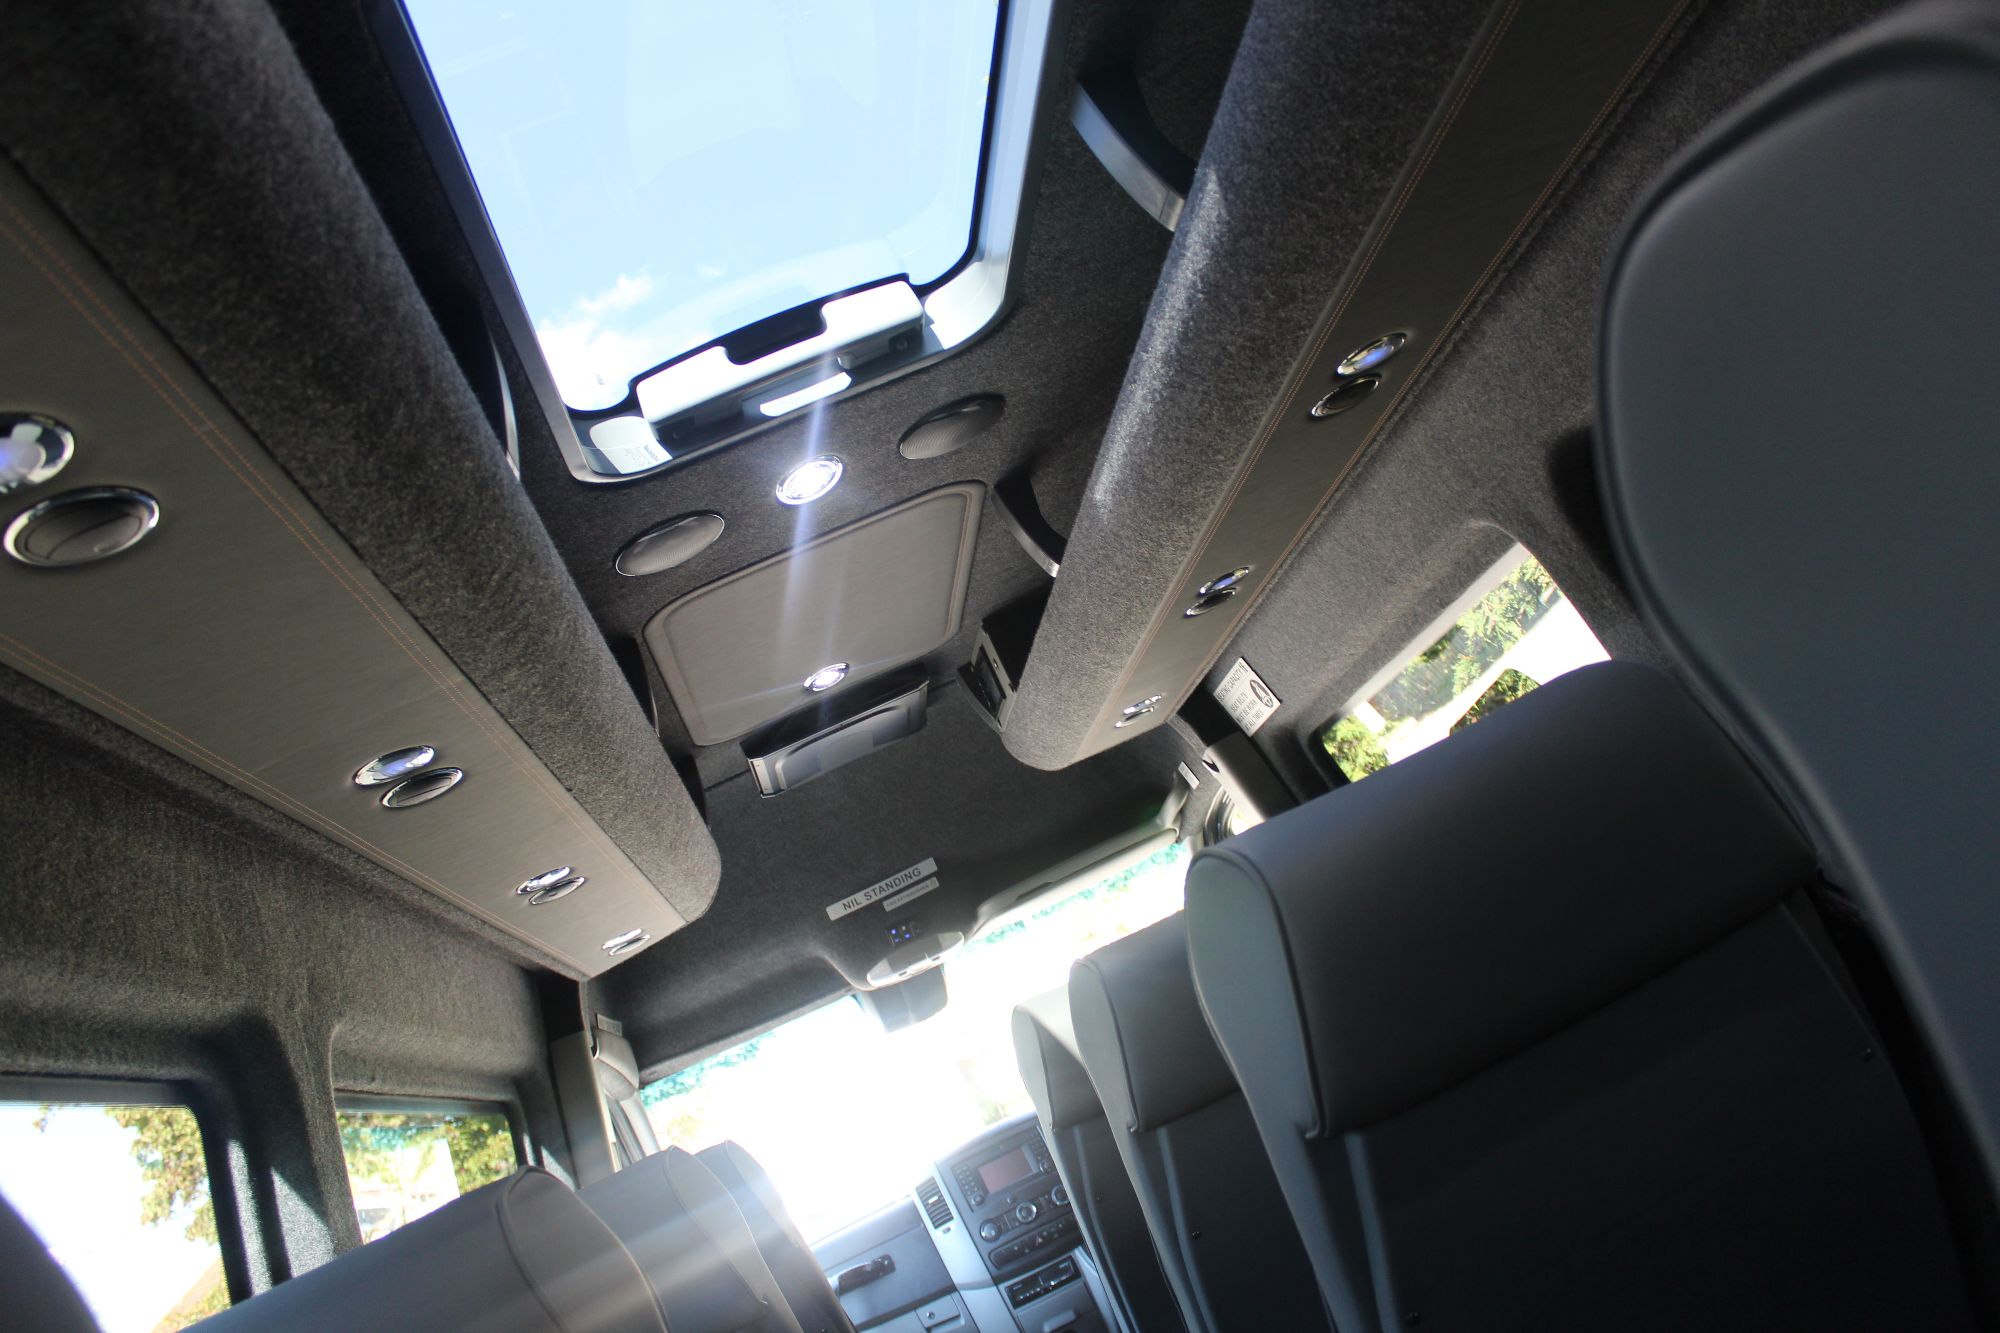 Image of Coach interior showing roof and seating materials